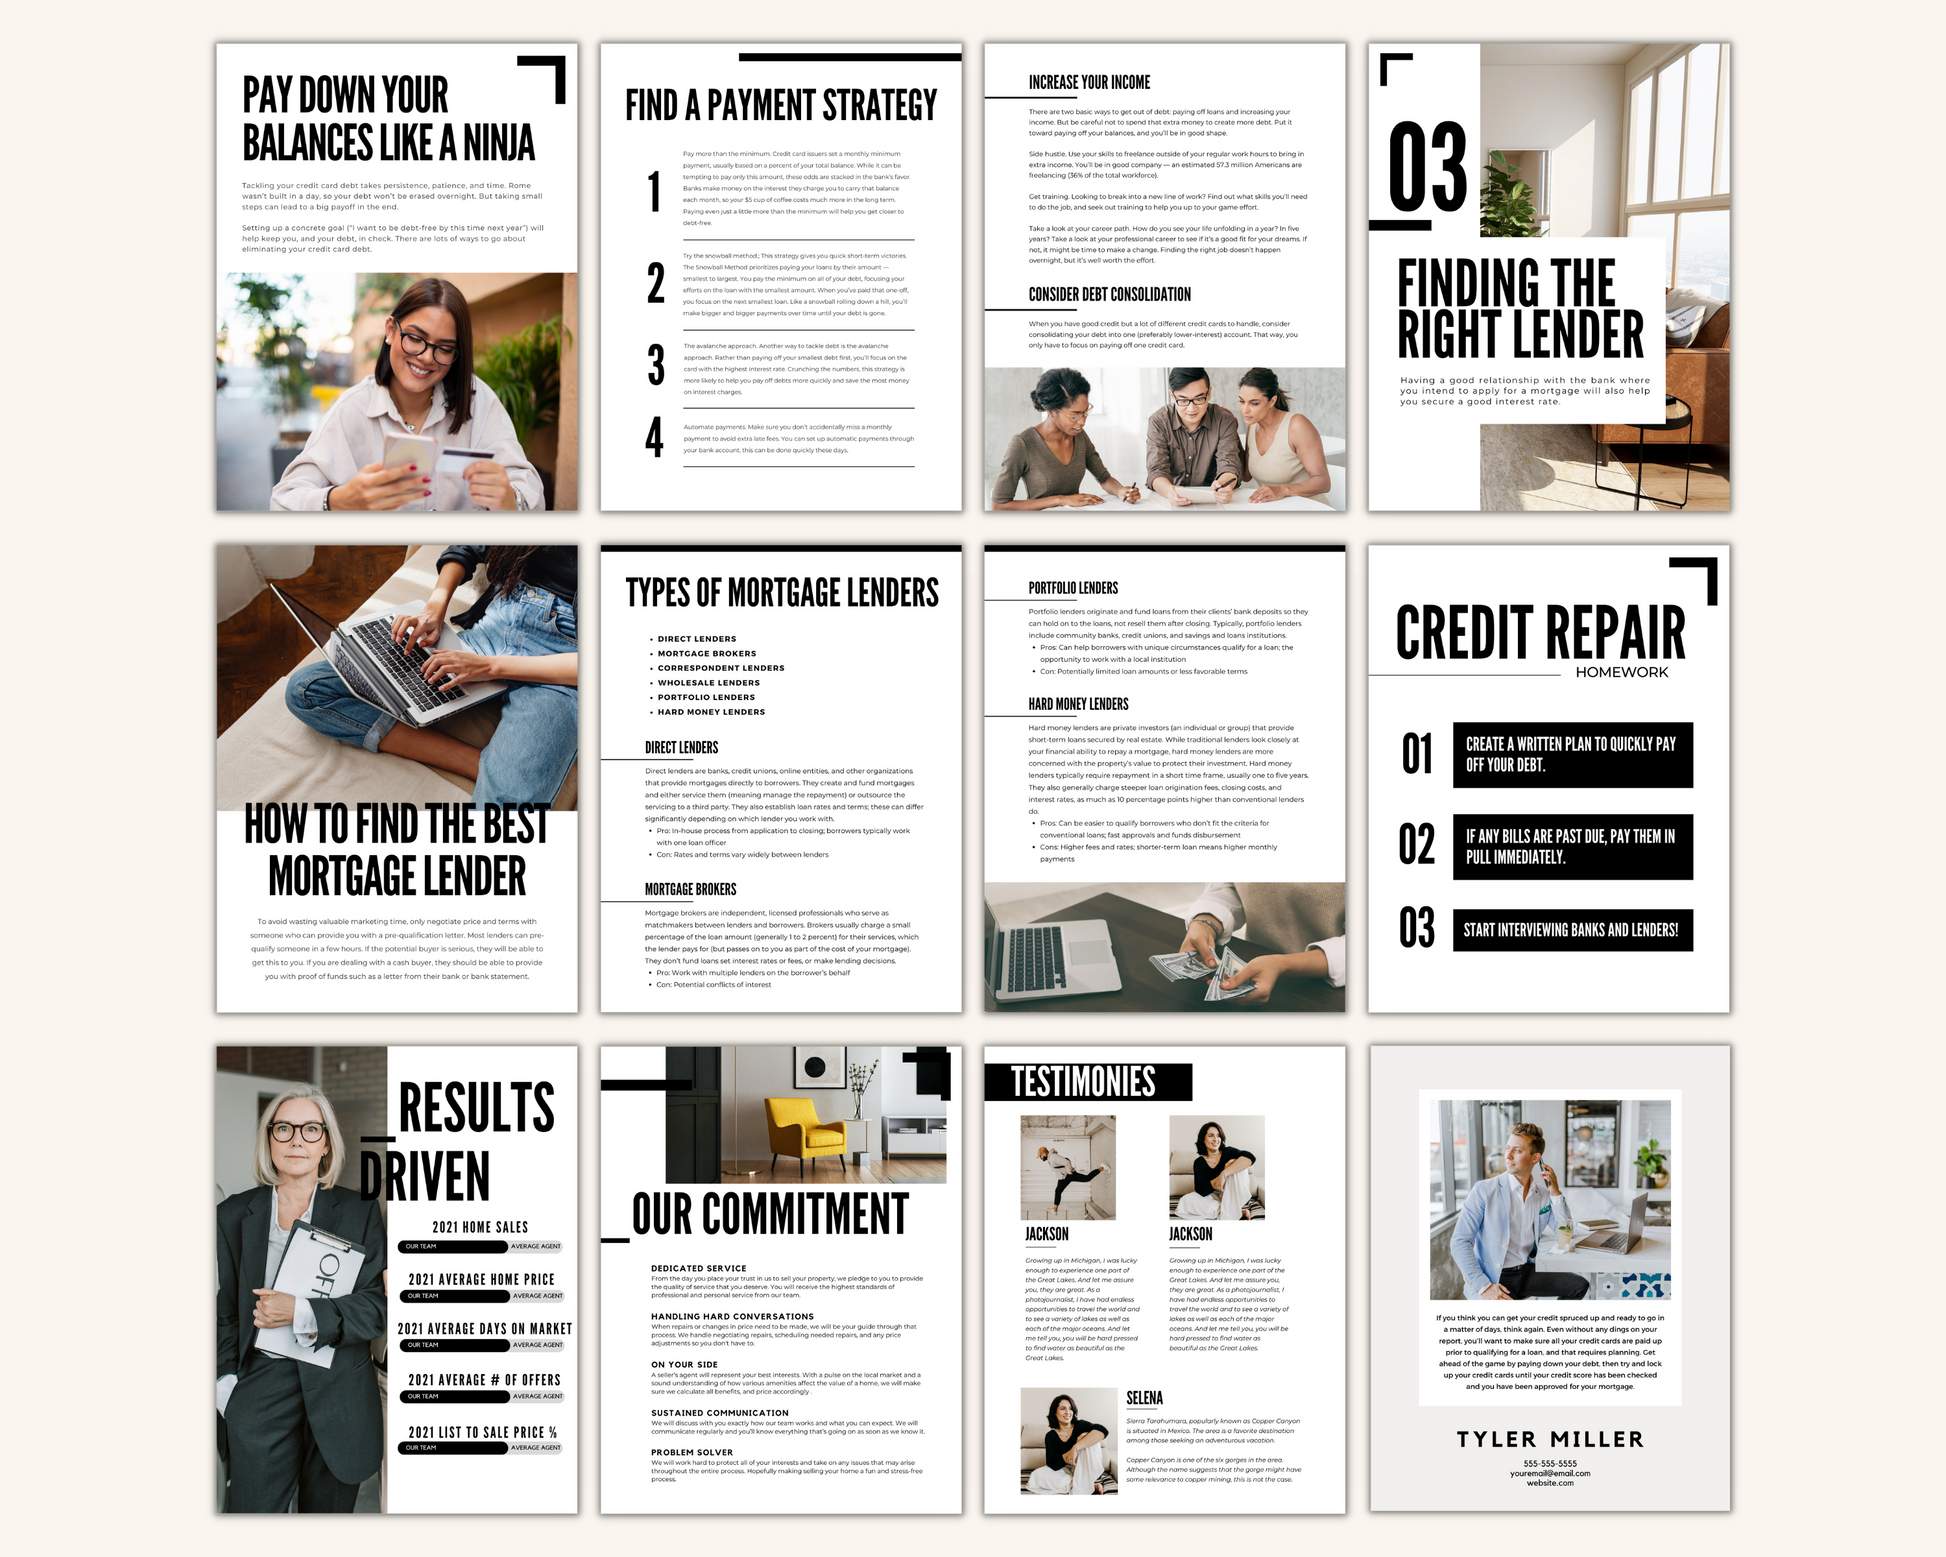 Real Estate Template for Improving Credit Real Estate Template for Credit Scores Real Estate Credit Printable Template Improve Your Credit Guide